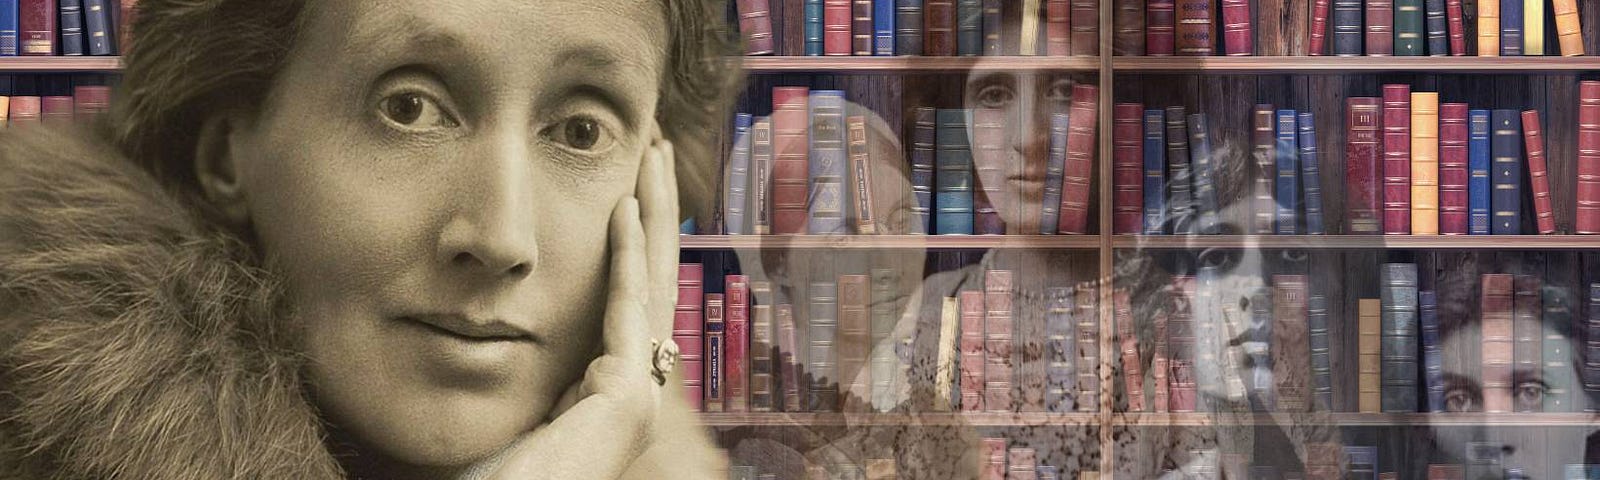 Virginia Woolf and the women who influenced her work